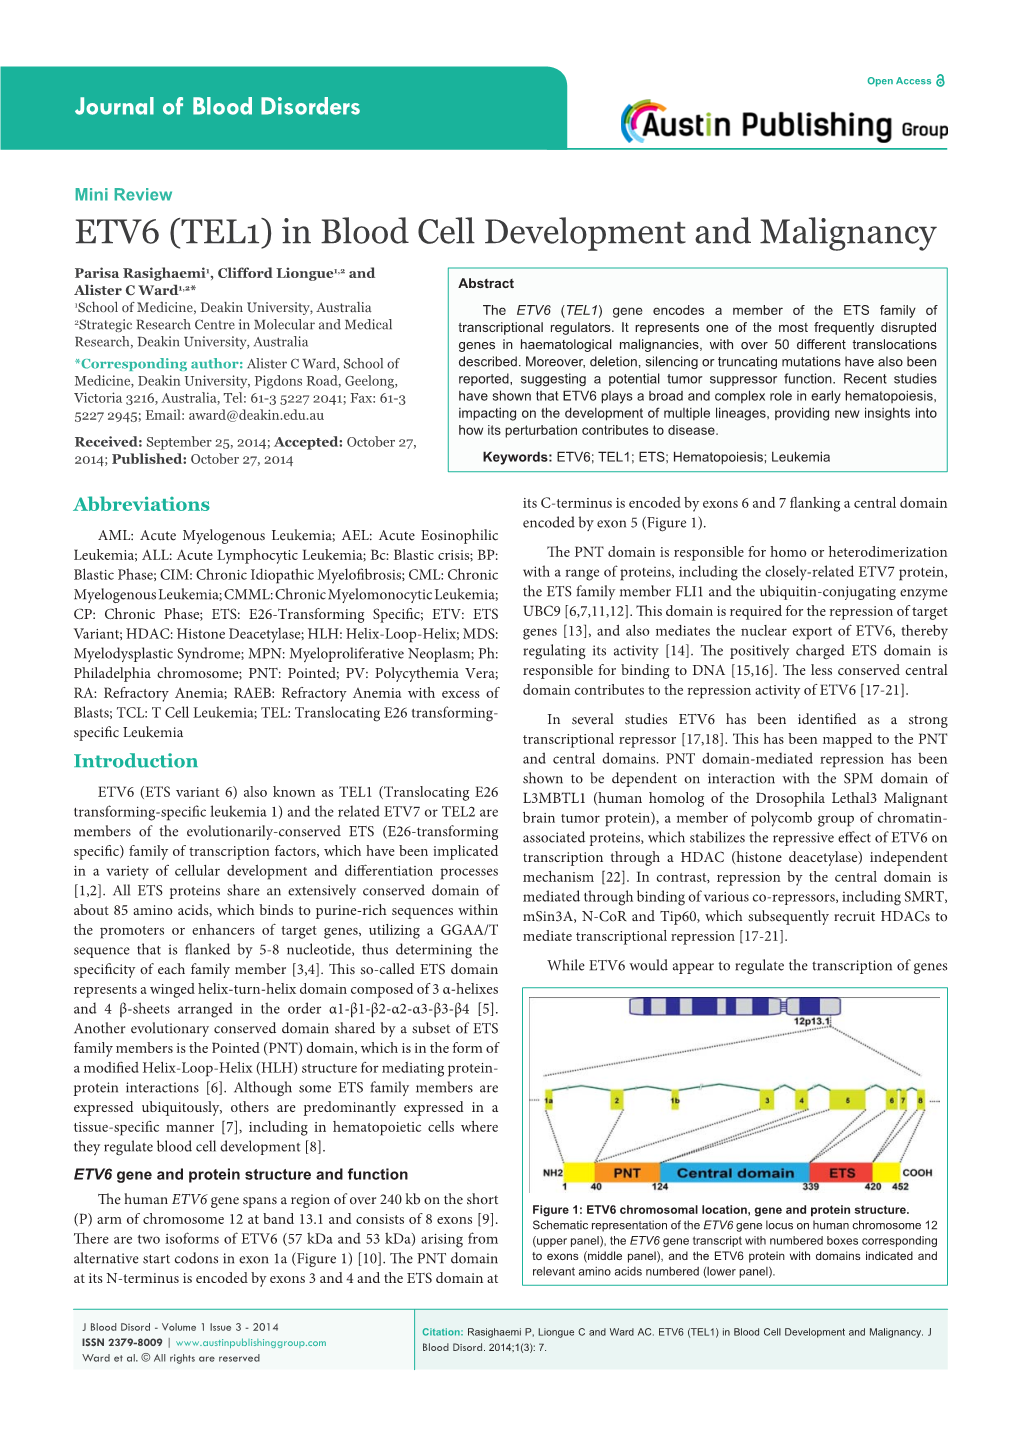 ETV6 (TEL1) in Blood Cell Development and Malignancy